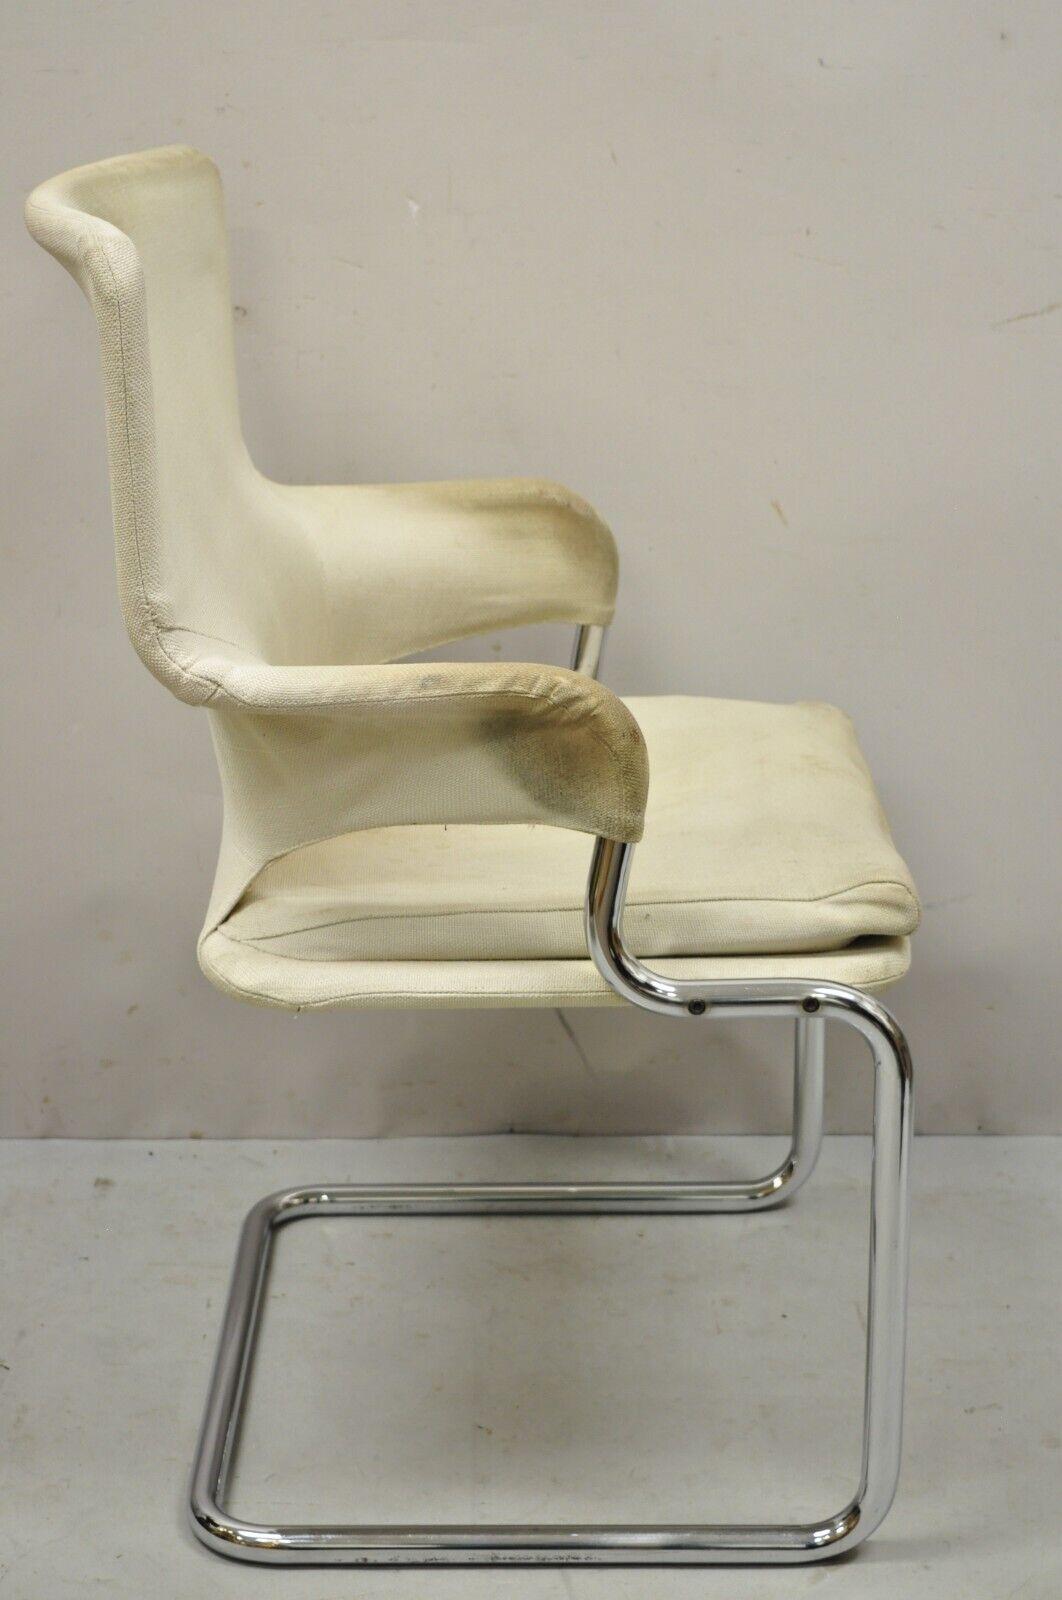 Vintage Mid-Century Modern Tubular Chrome Arm Chair with Burlap Seat In Good Condition For Sale In Philadelphia, PA